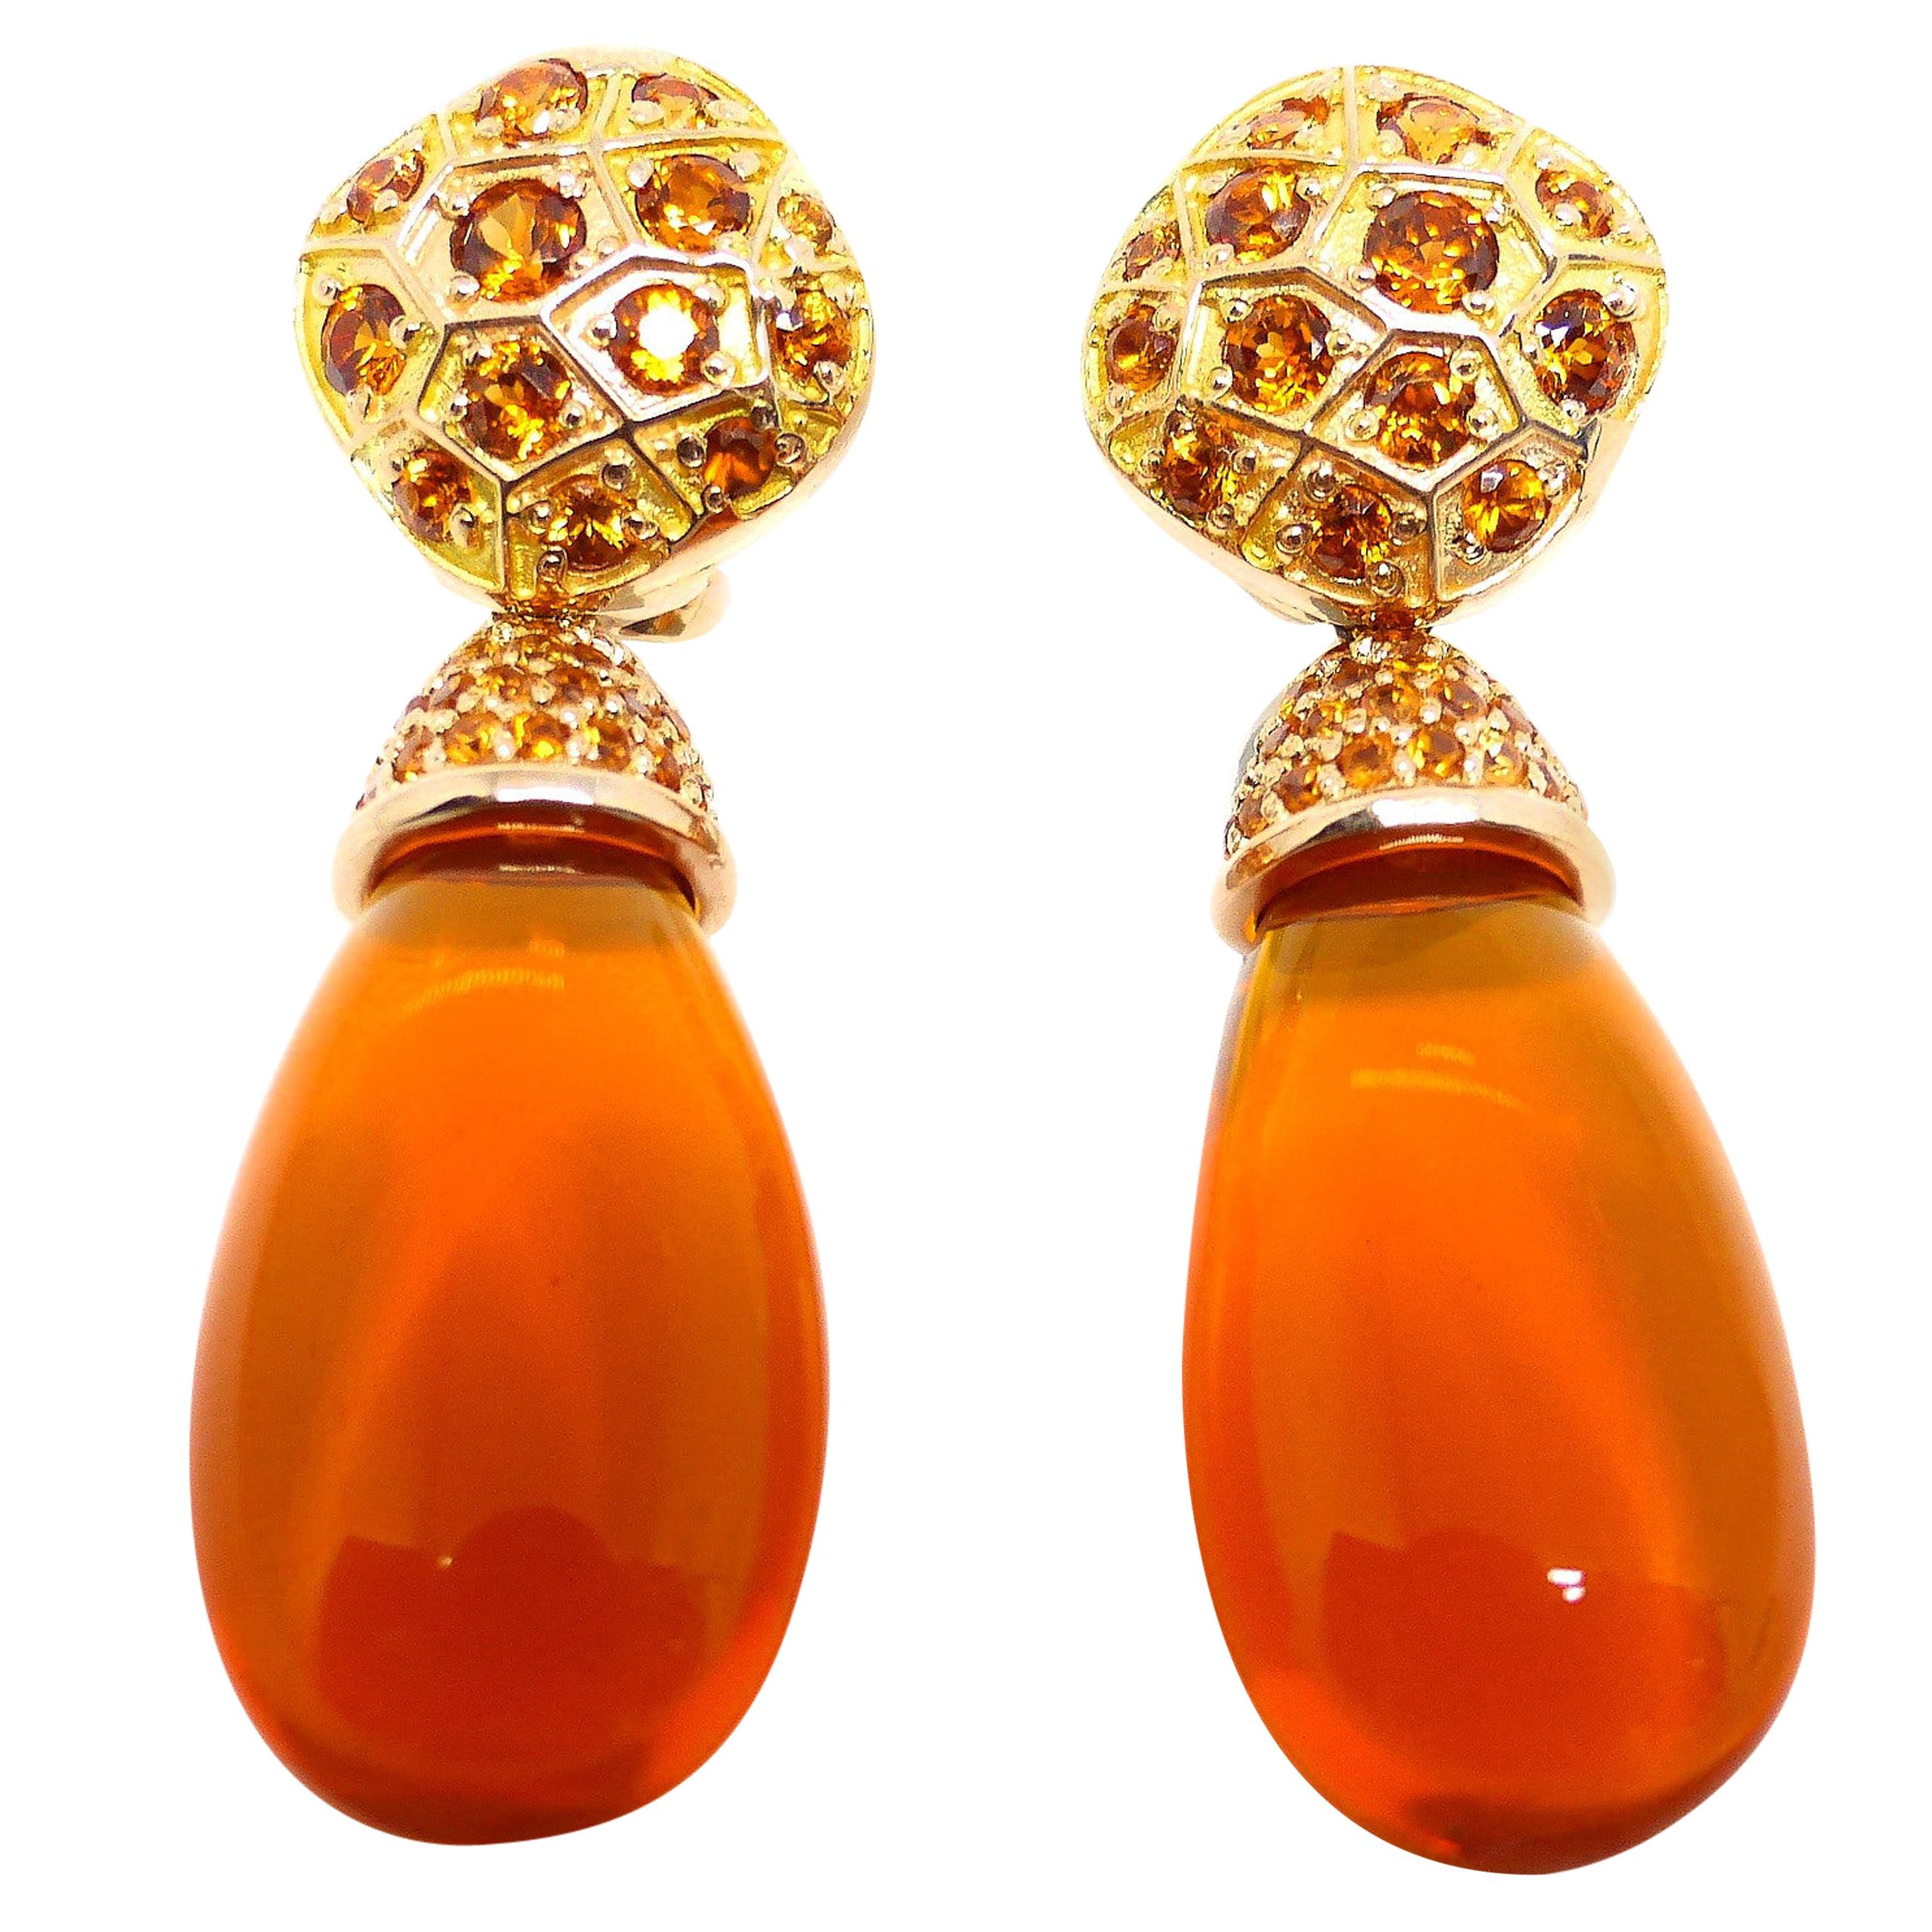 Earrings in Red Gold with 2 Fire Opal Brioletts and Mandarine Garnets. For Sale